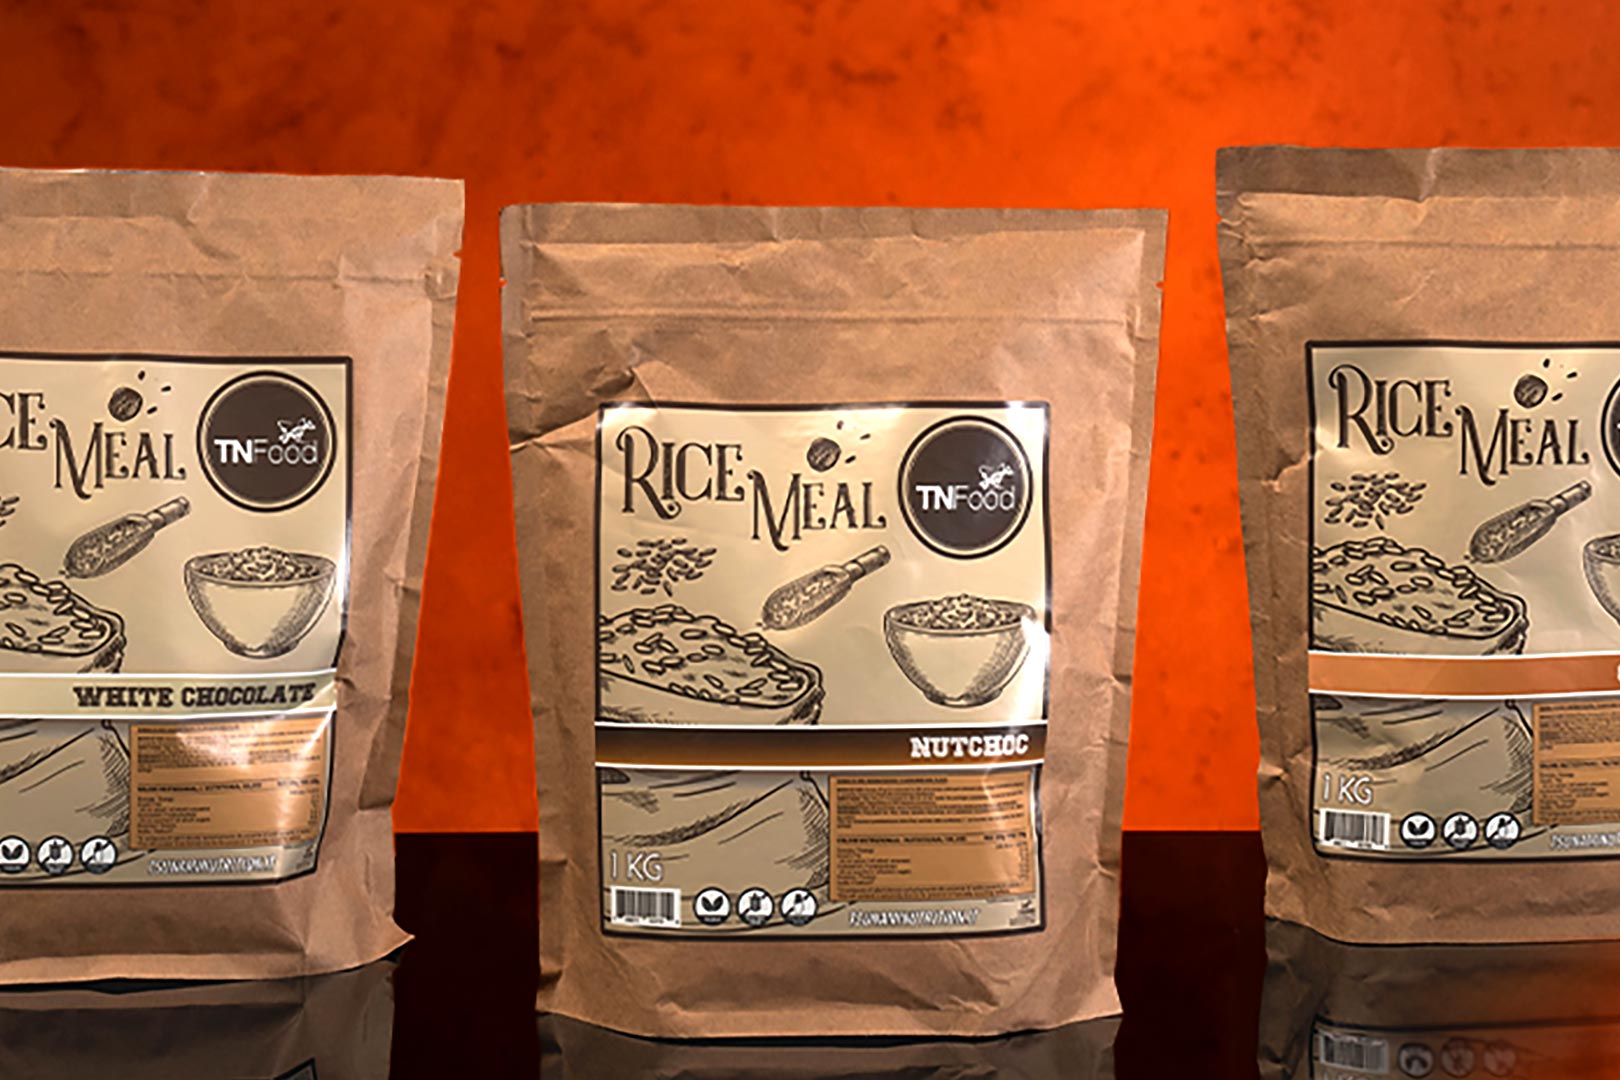 Tsunami Nutrition Adds Another Three Flavors To Rice Meal